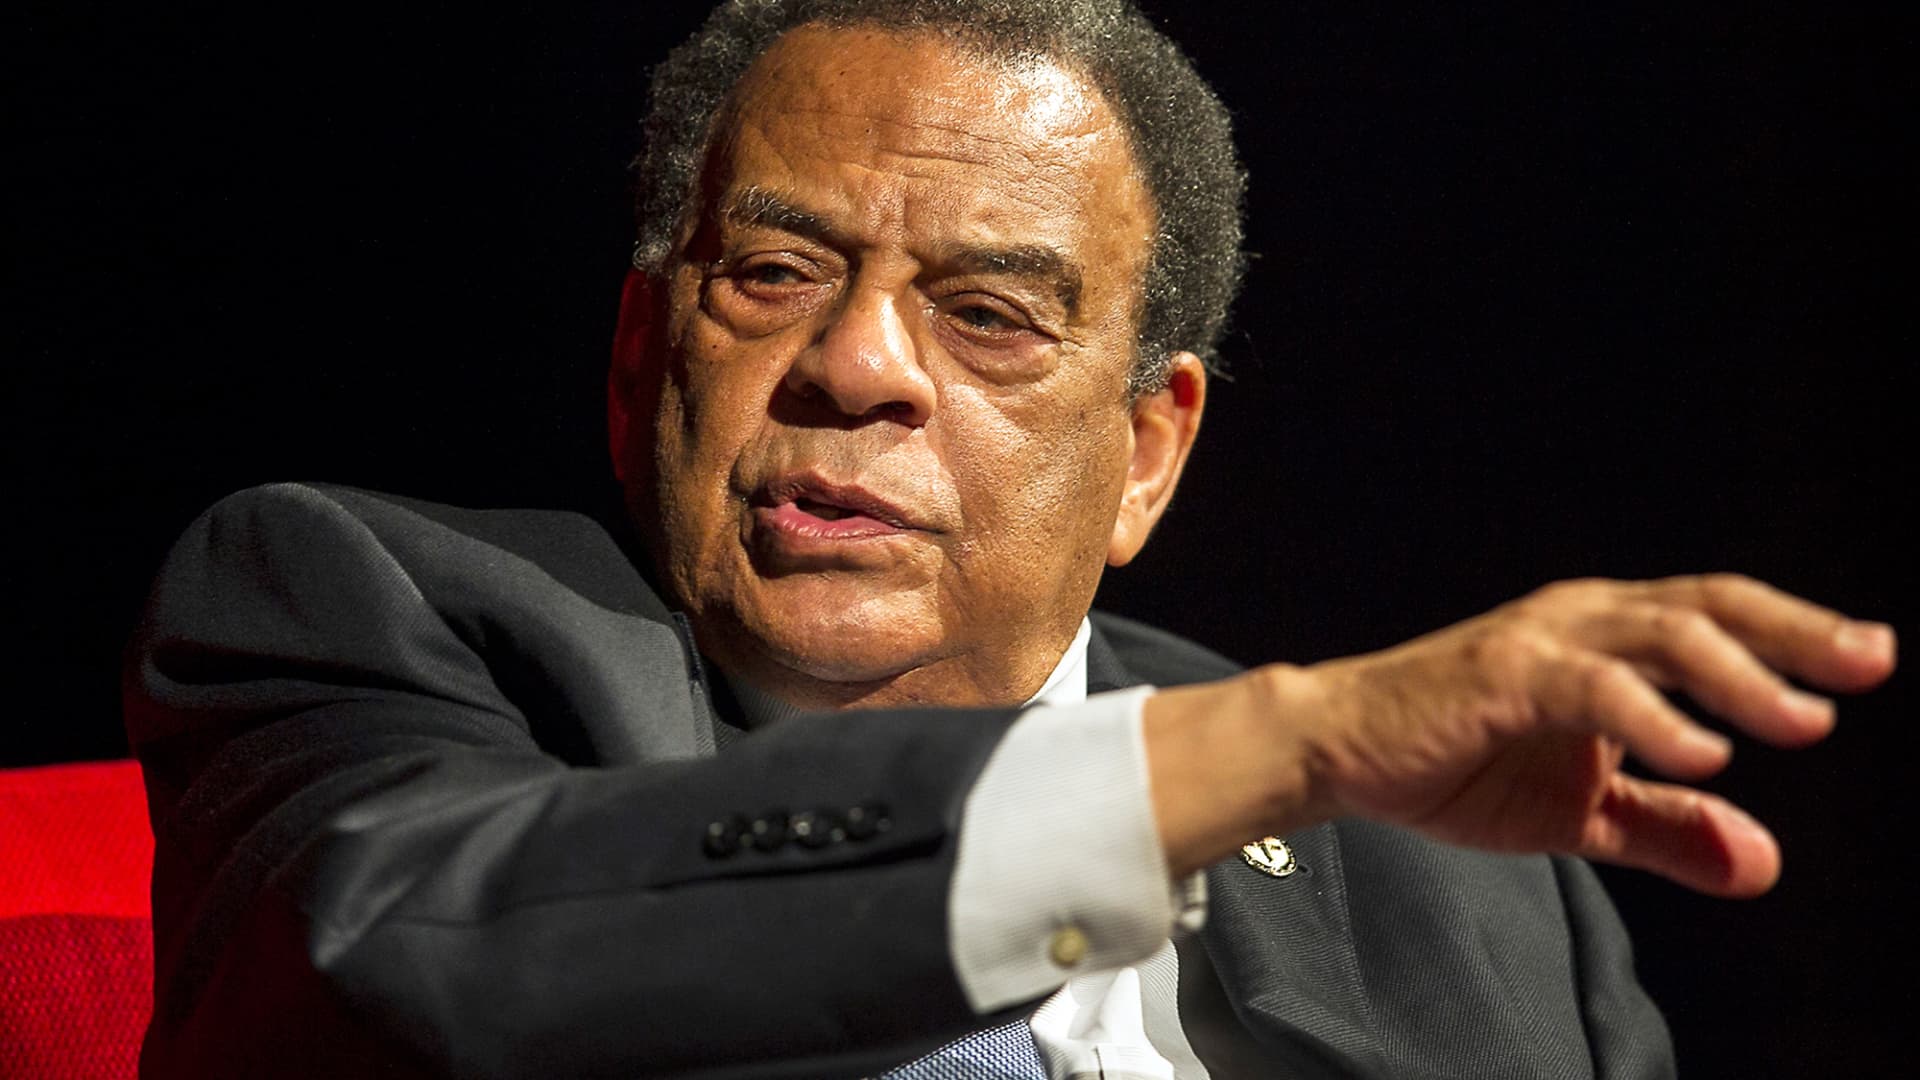 Andrew Young, former congressman and Ambassador to the United Nations, in Austin, Texas, April 9, 2014